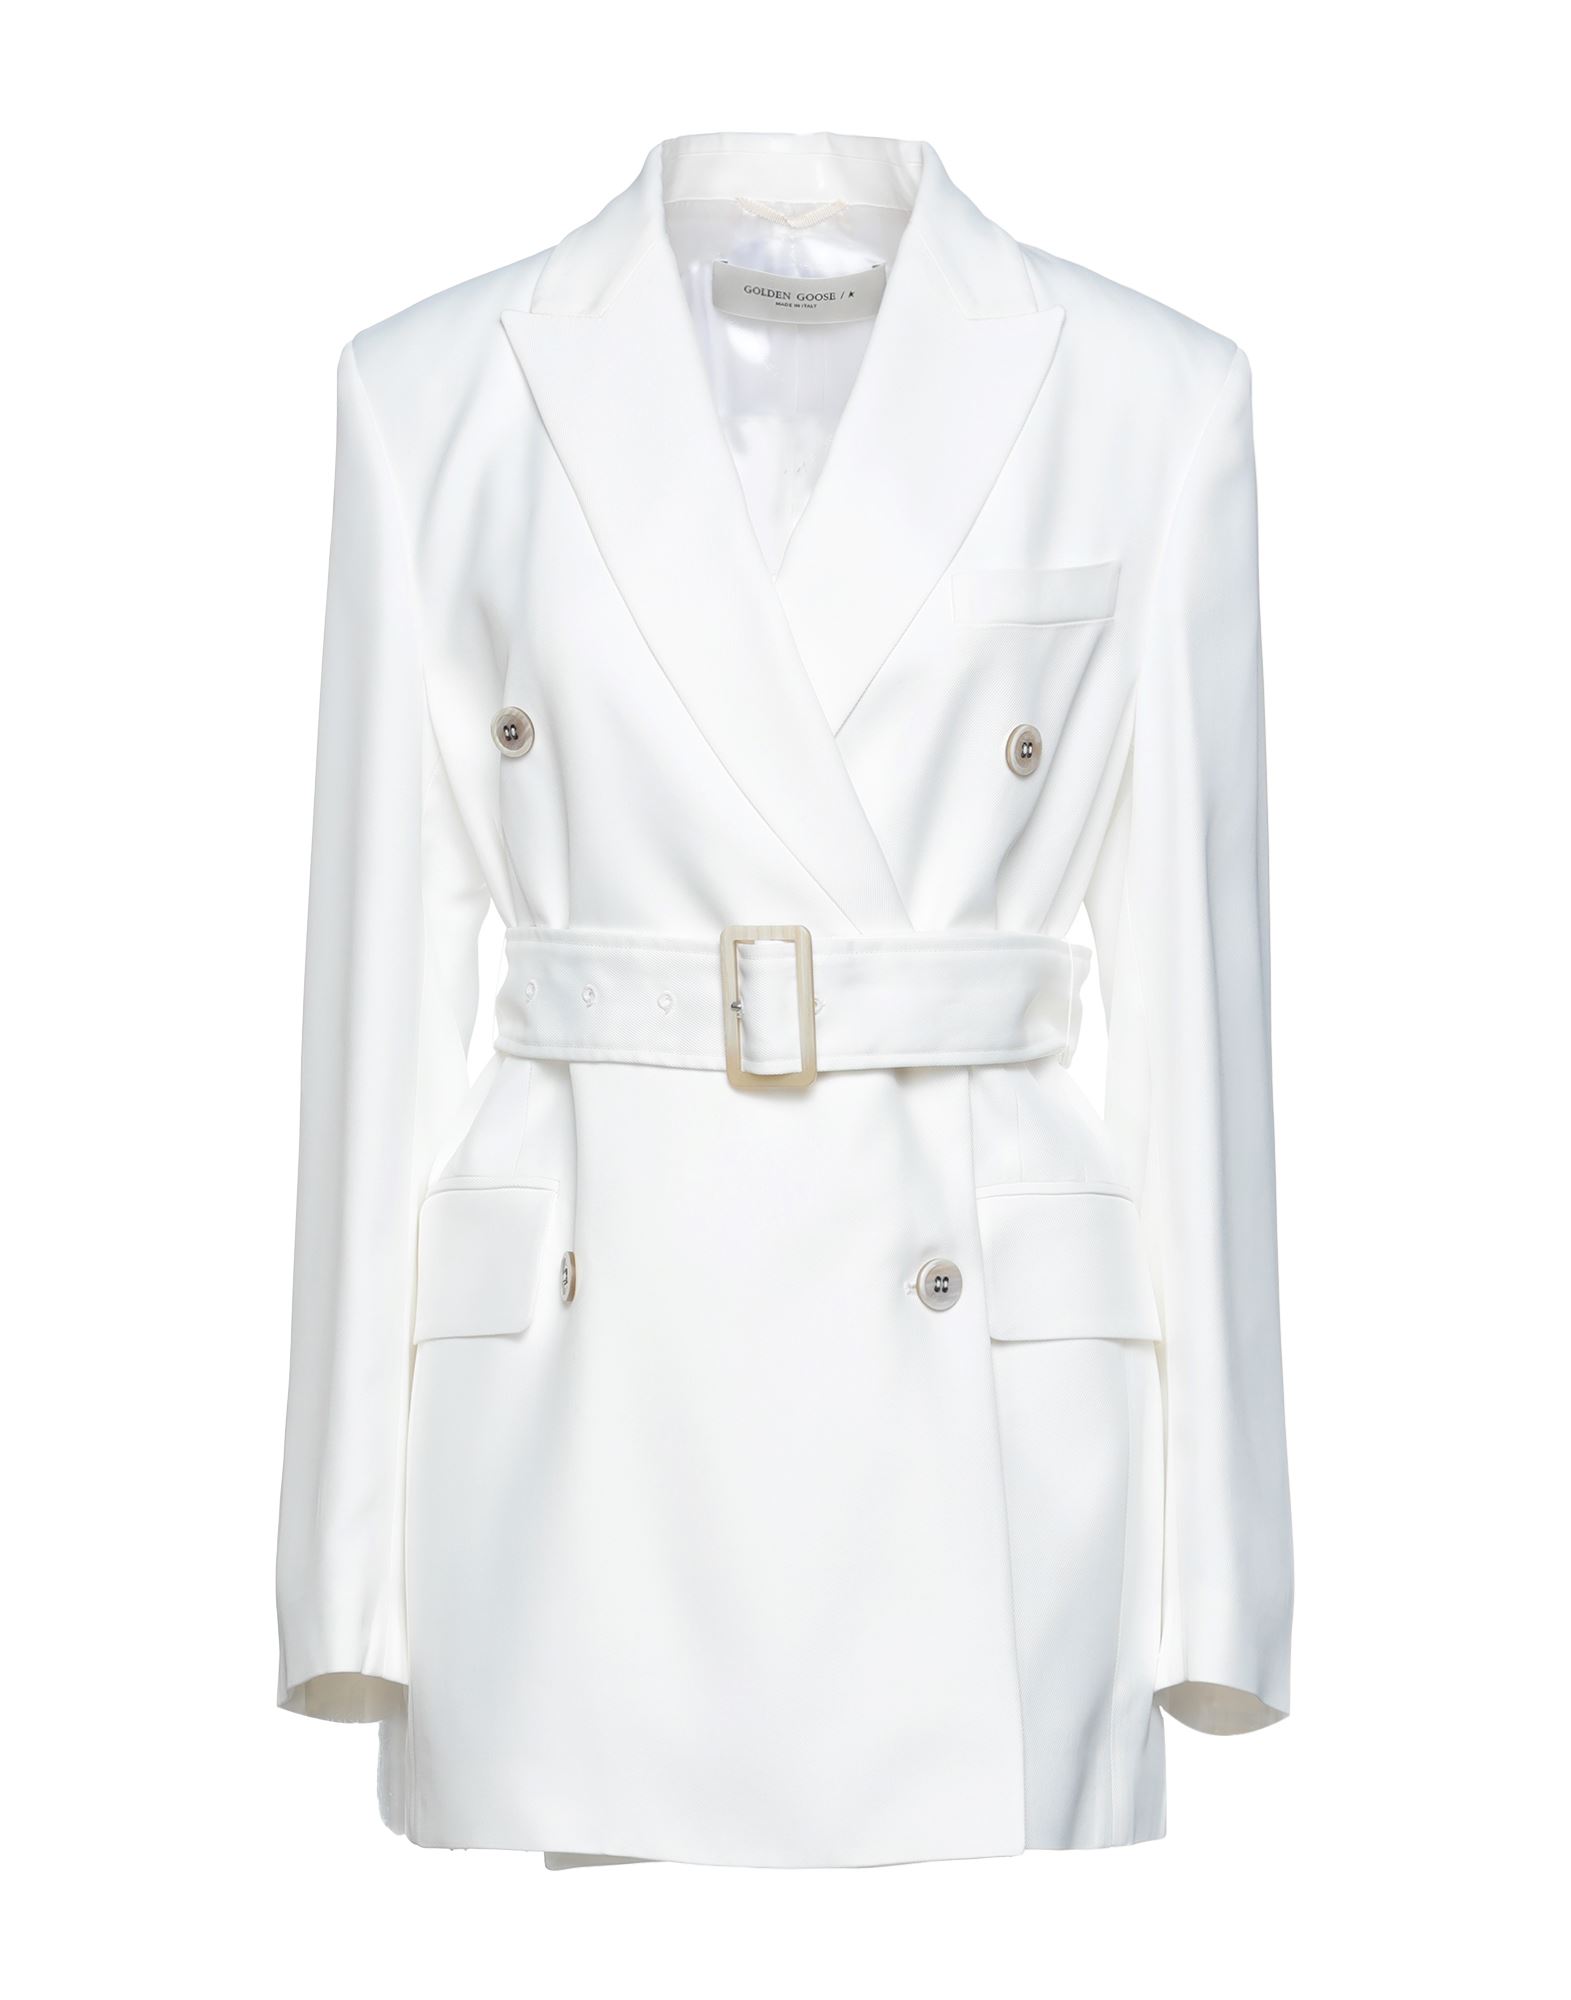 Golden Goose Deluxe Brand Suit Jackets In White